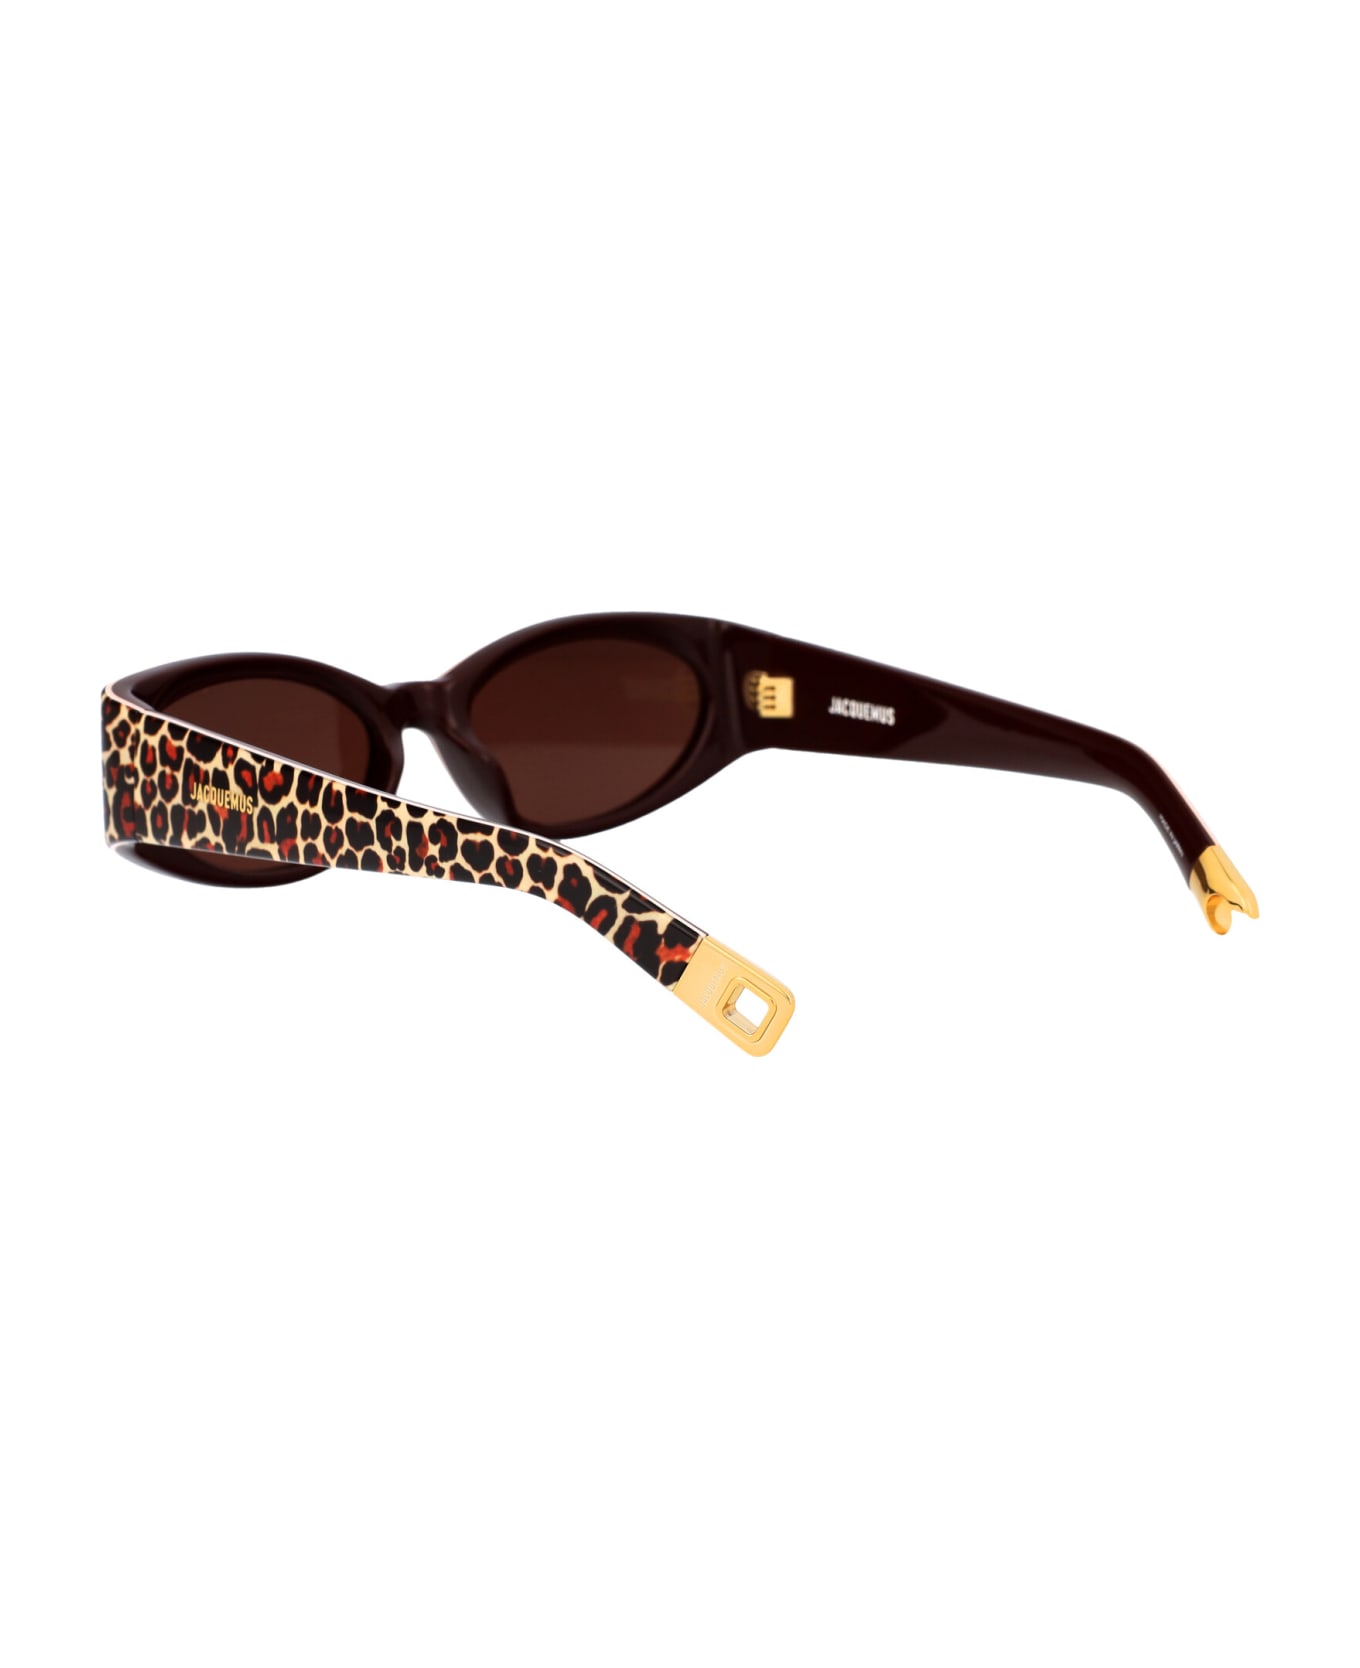 Jacquemus Ovalo Sunglasses - 02 LEOPARD/ YELLOW GOLD/ BROWN